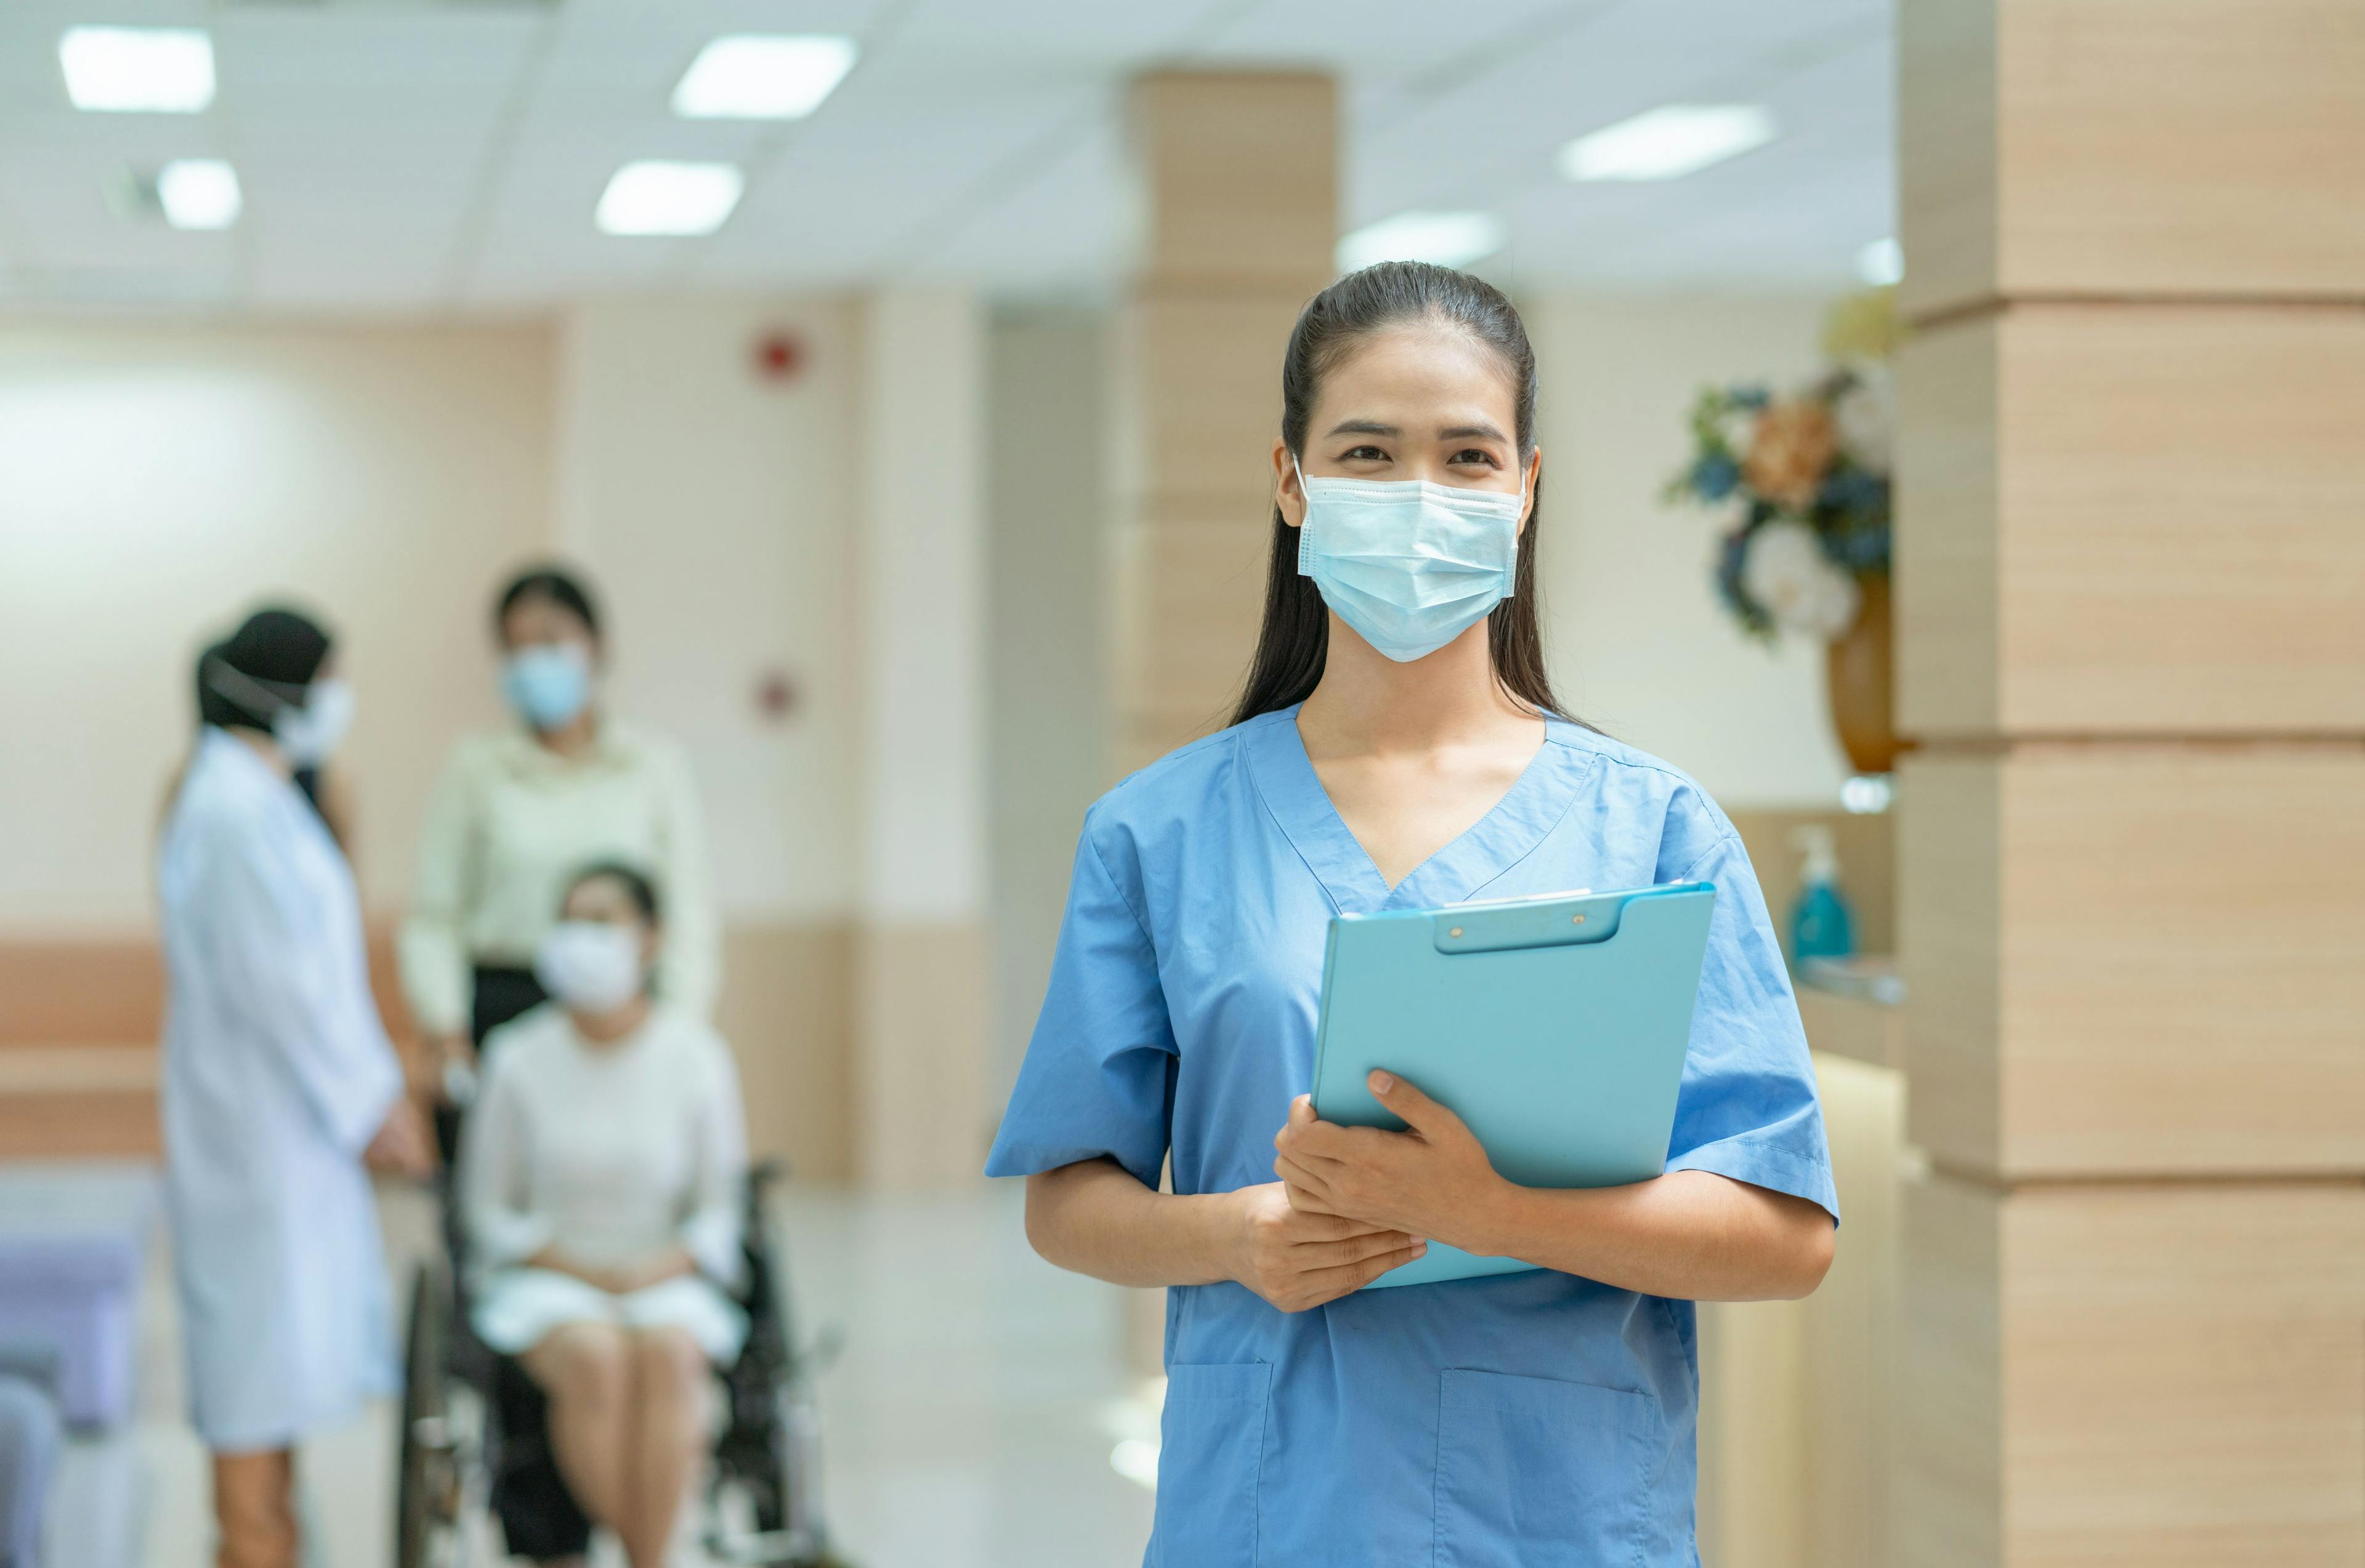 More hospitals revive mask policies, as flu, COVID, RSV cases rise